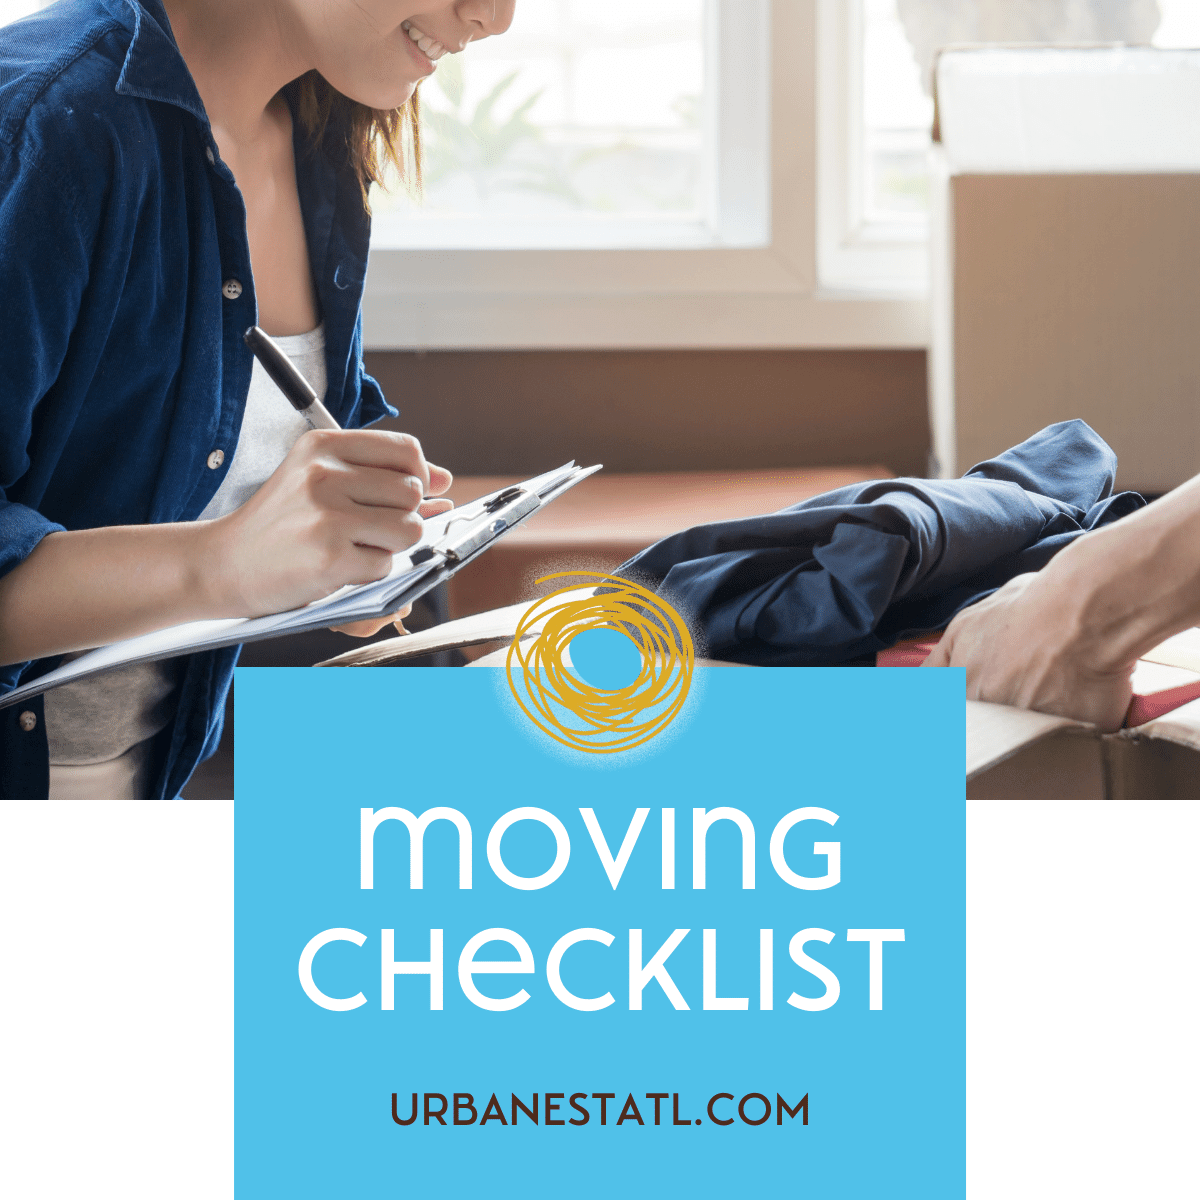 New home owner with checklist of things to do before moving into home